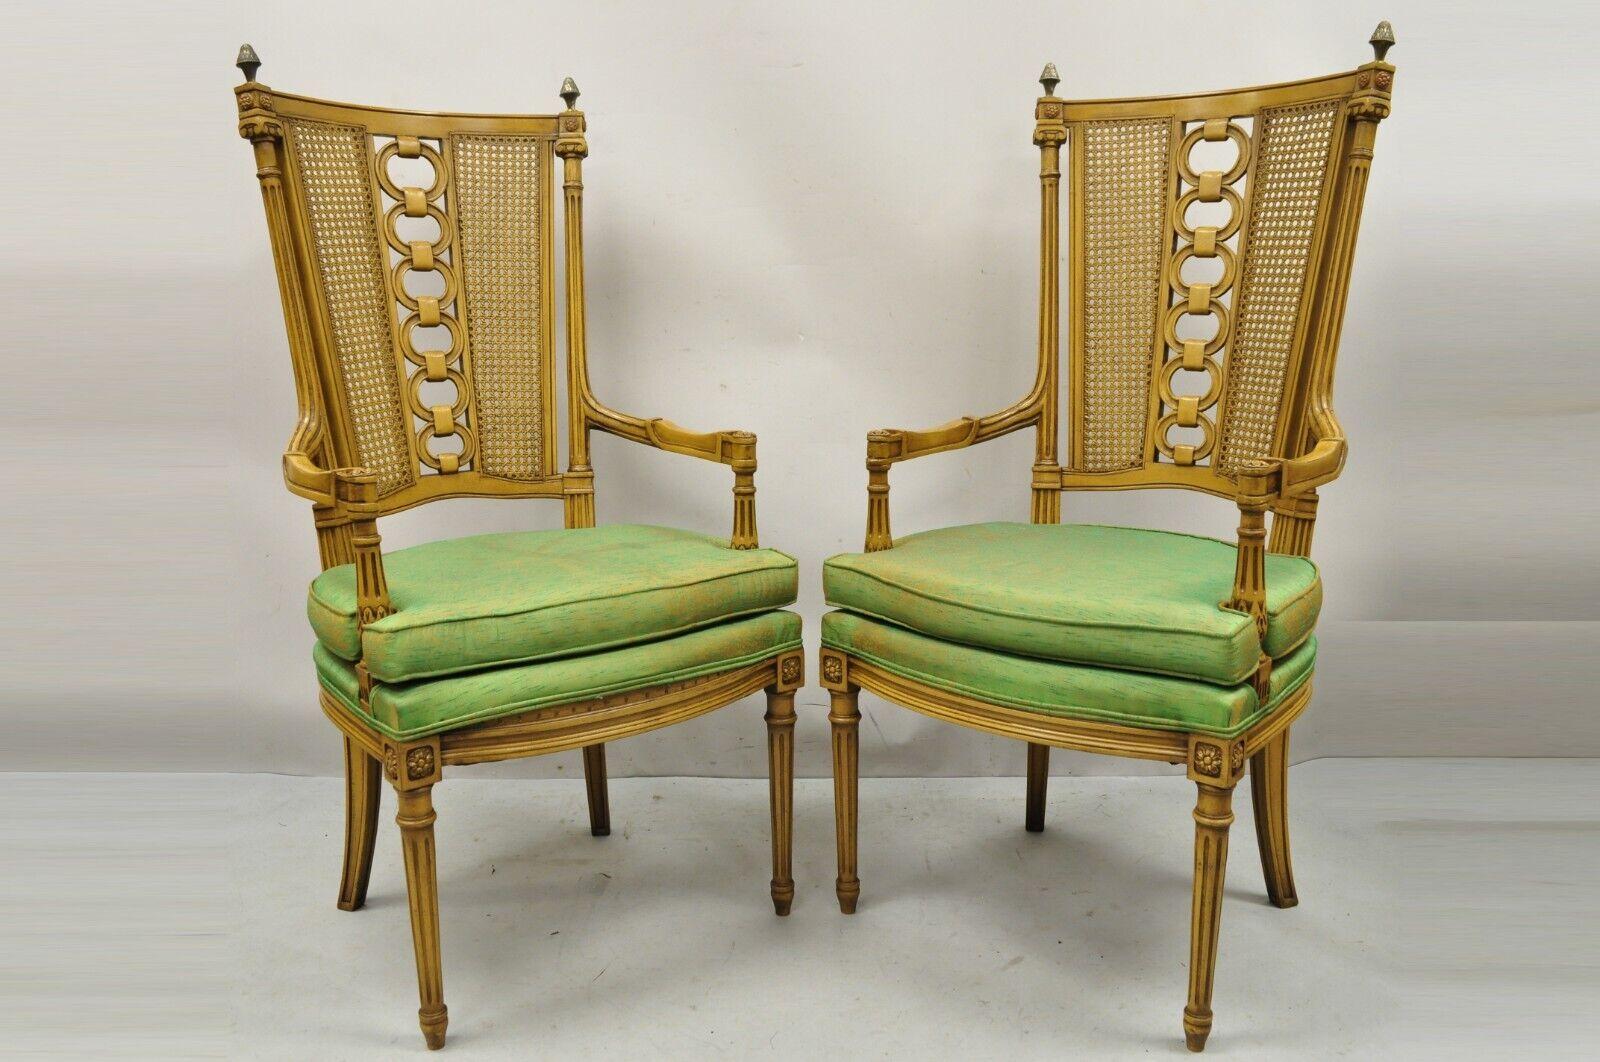 Vintage French Hollywood Regency Tall Cane Back Carved Link Chairs, a Pair For Sale 7